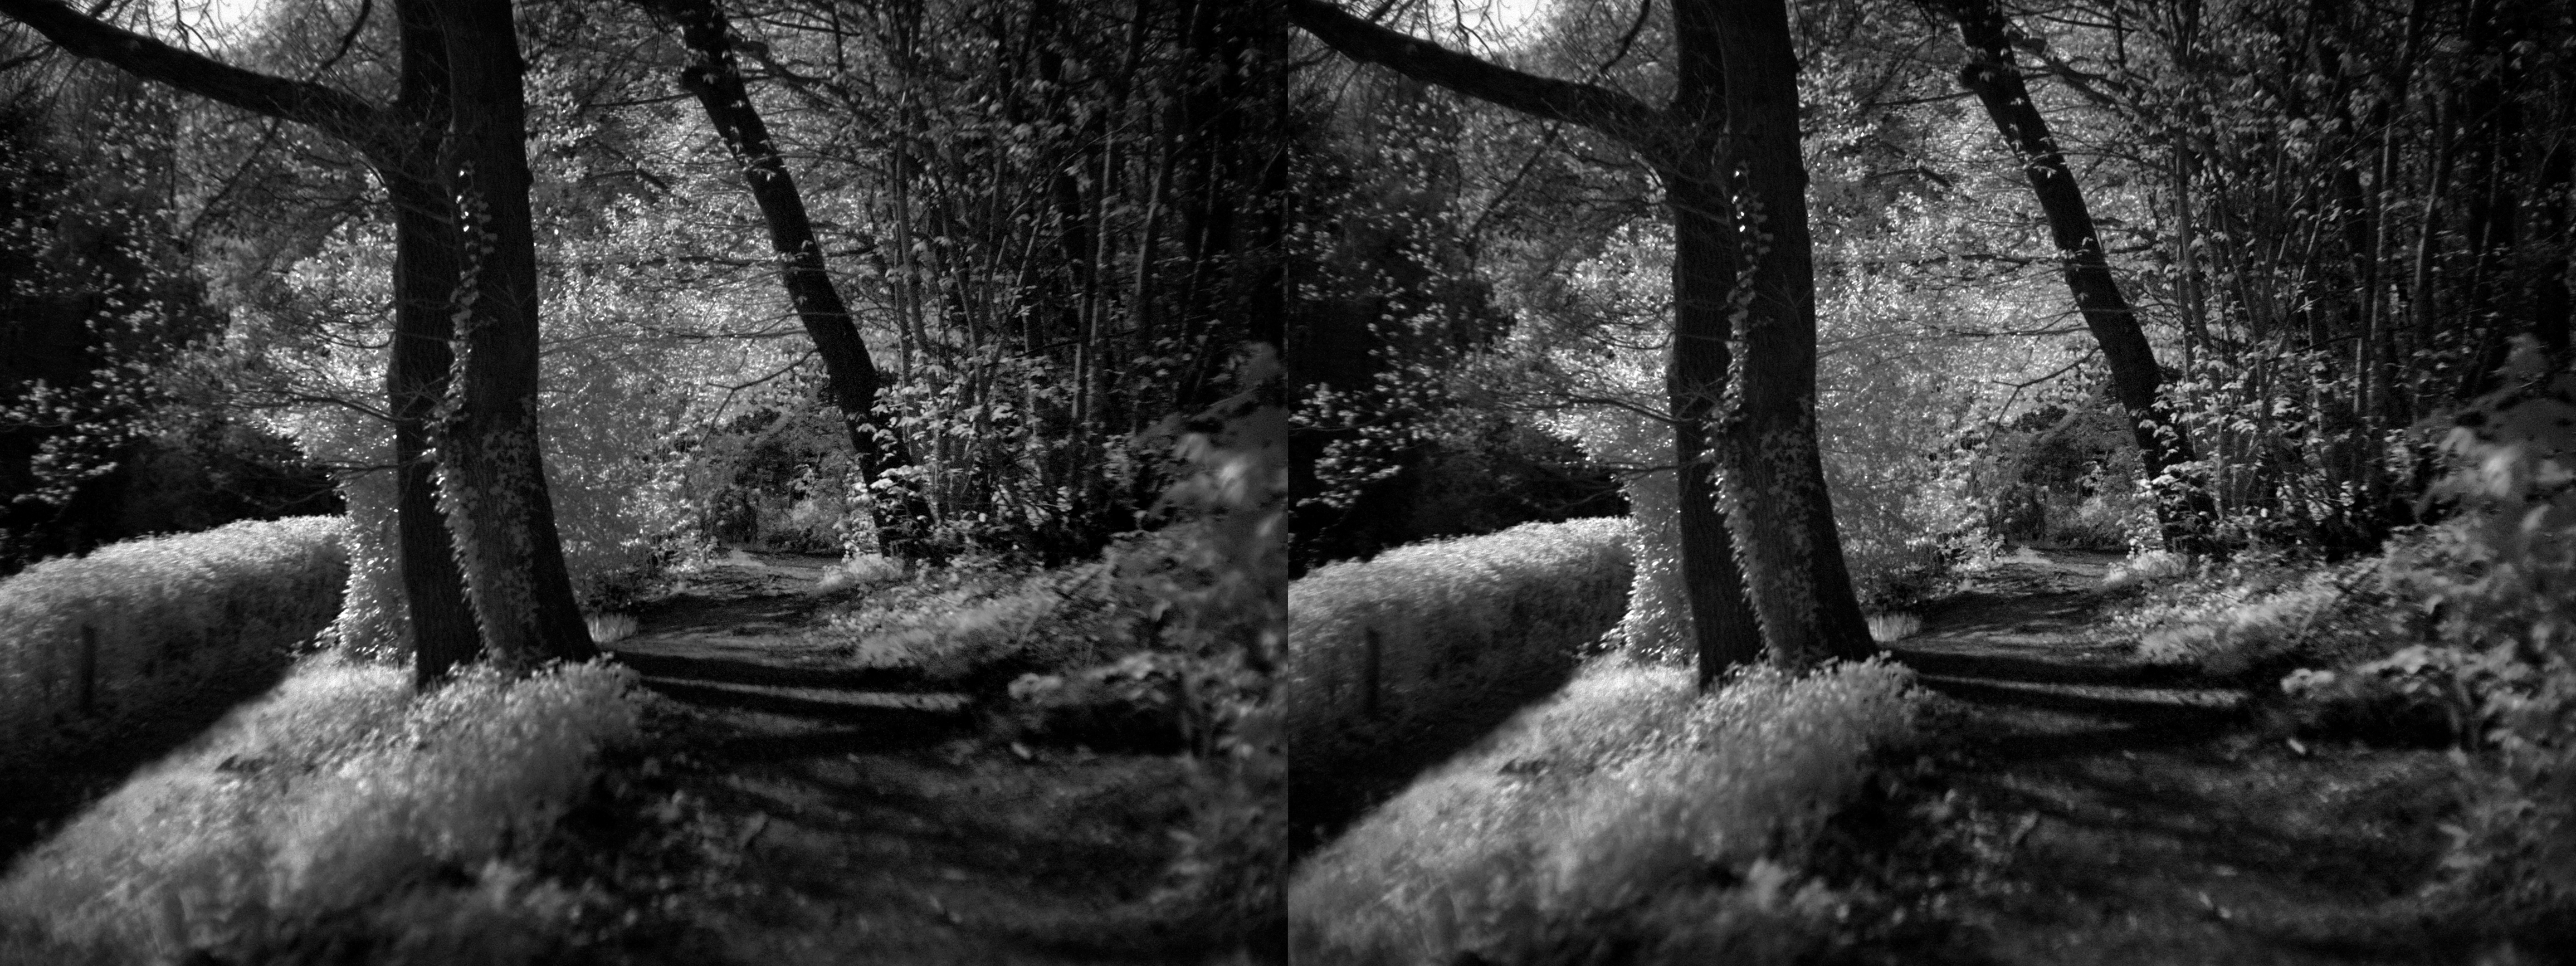 Black and white photo of a path that runs parallel to a valley on the left of the image. The path runs deep into the photo, away from us. Moonlight from the left hits the foliage at the roots of the trees left and right of the path. Shades of the stems of the trees cross the old path, and show it is hollowed out over the ages.